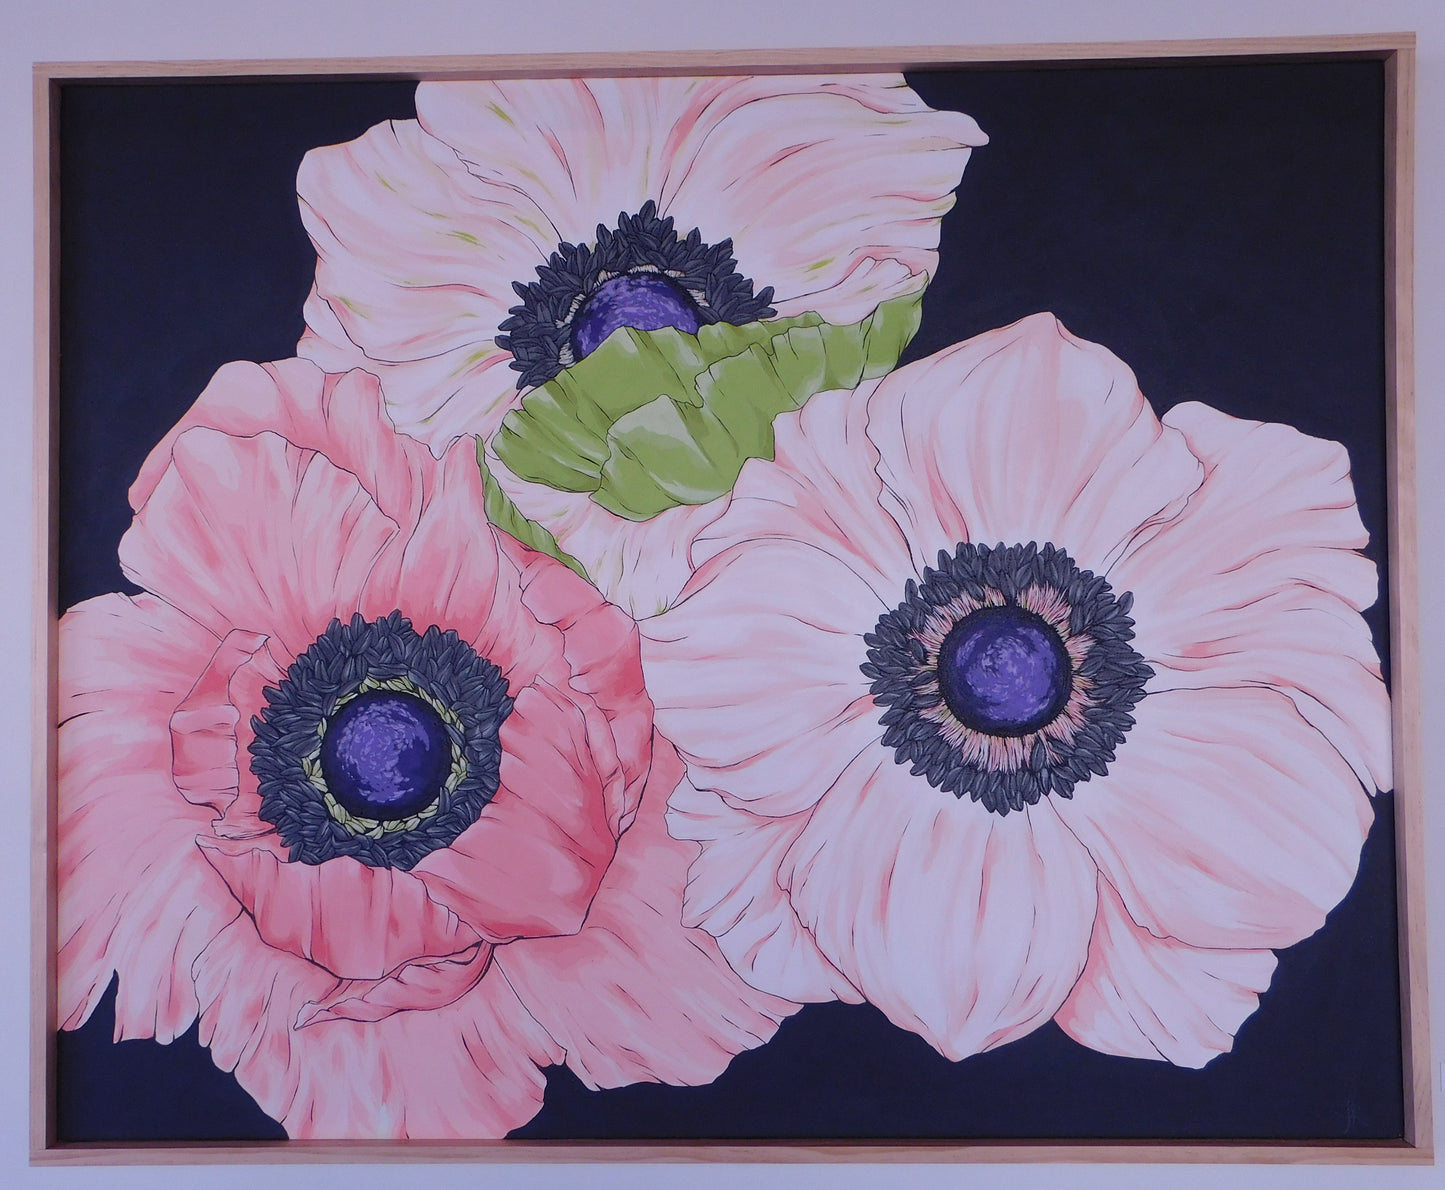 Toby Keough - Anemone flowers for Amber